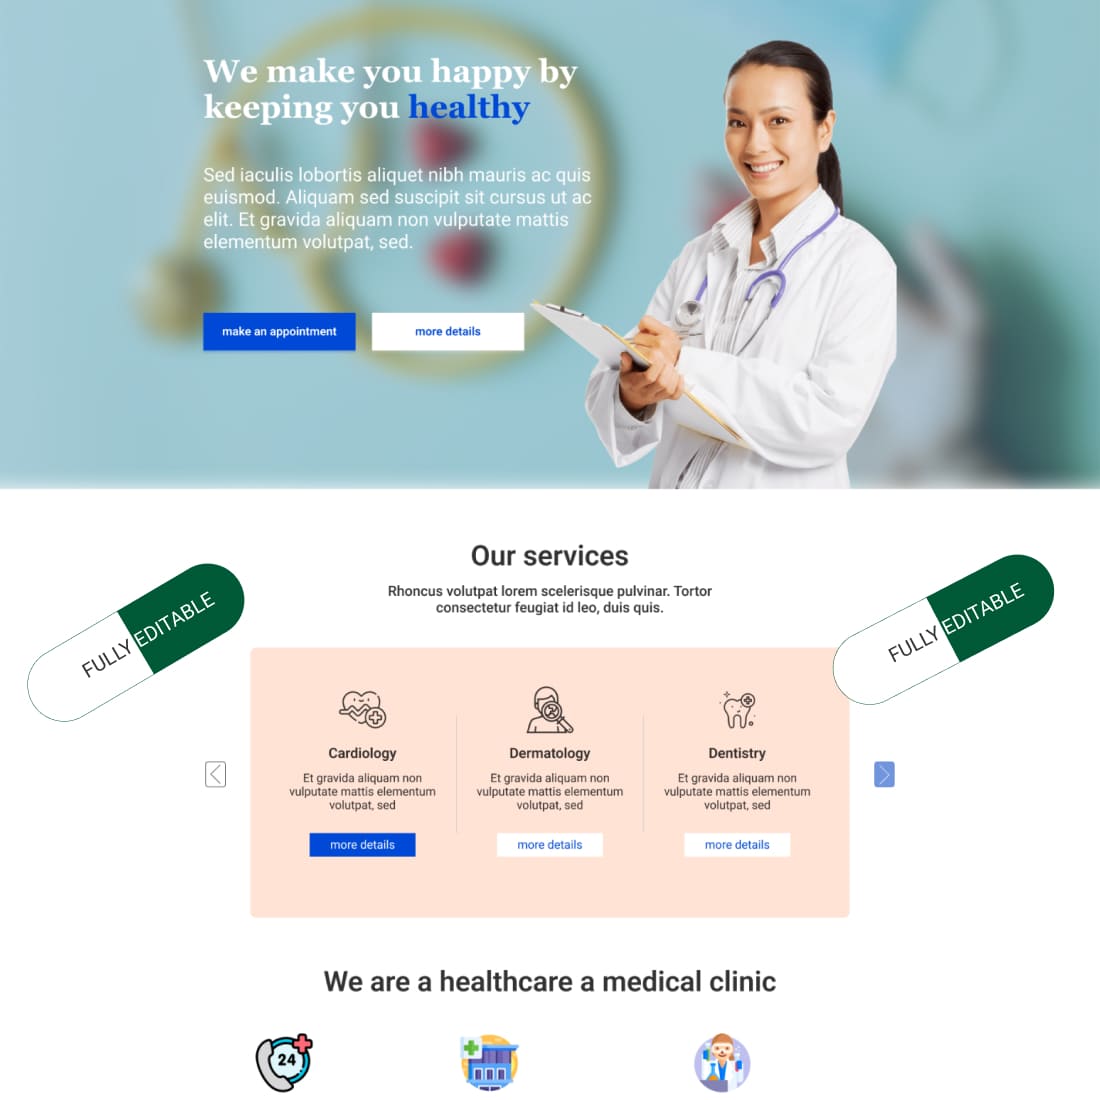 healthcare landing page template cover.